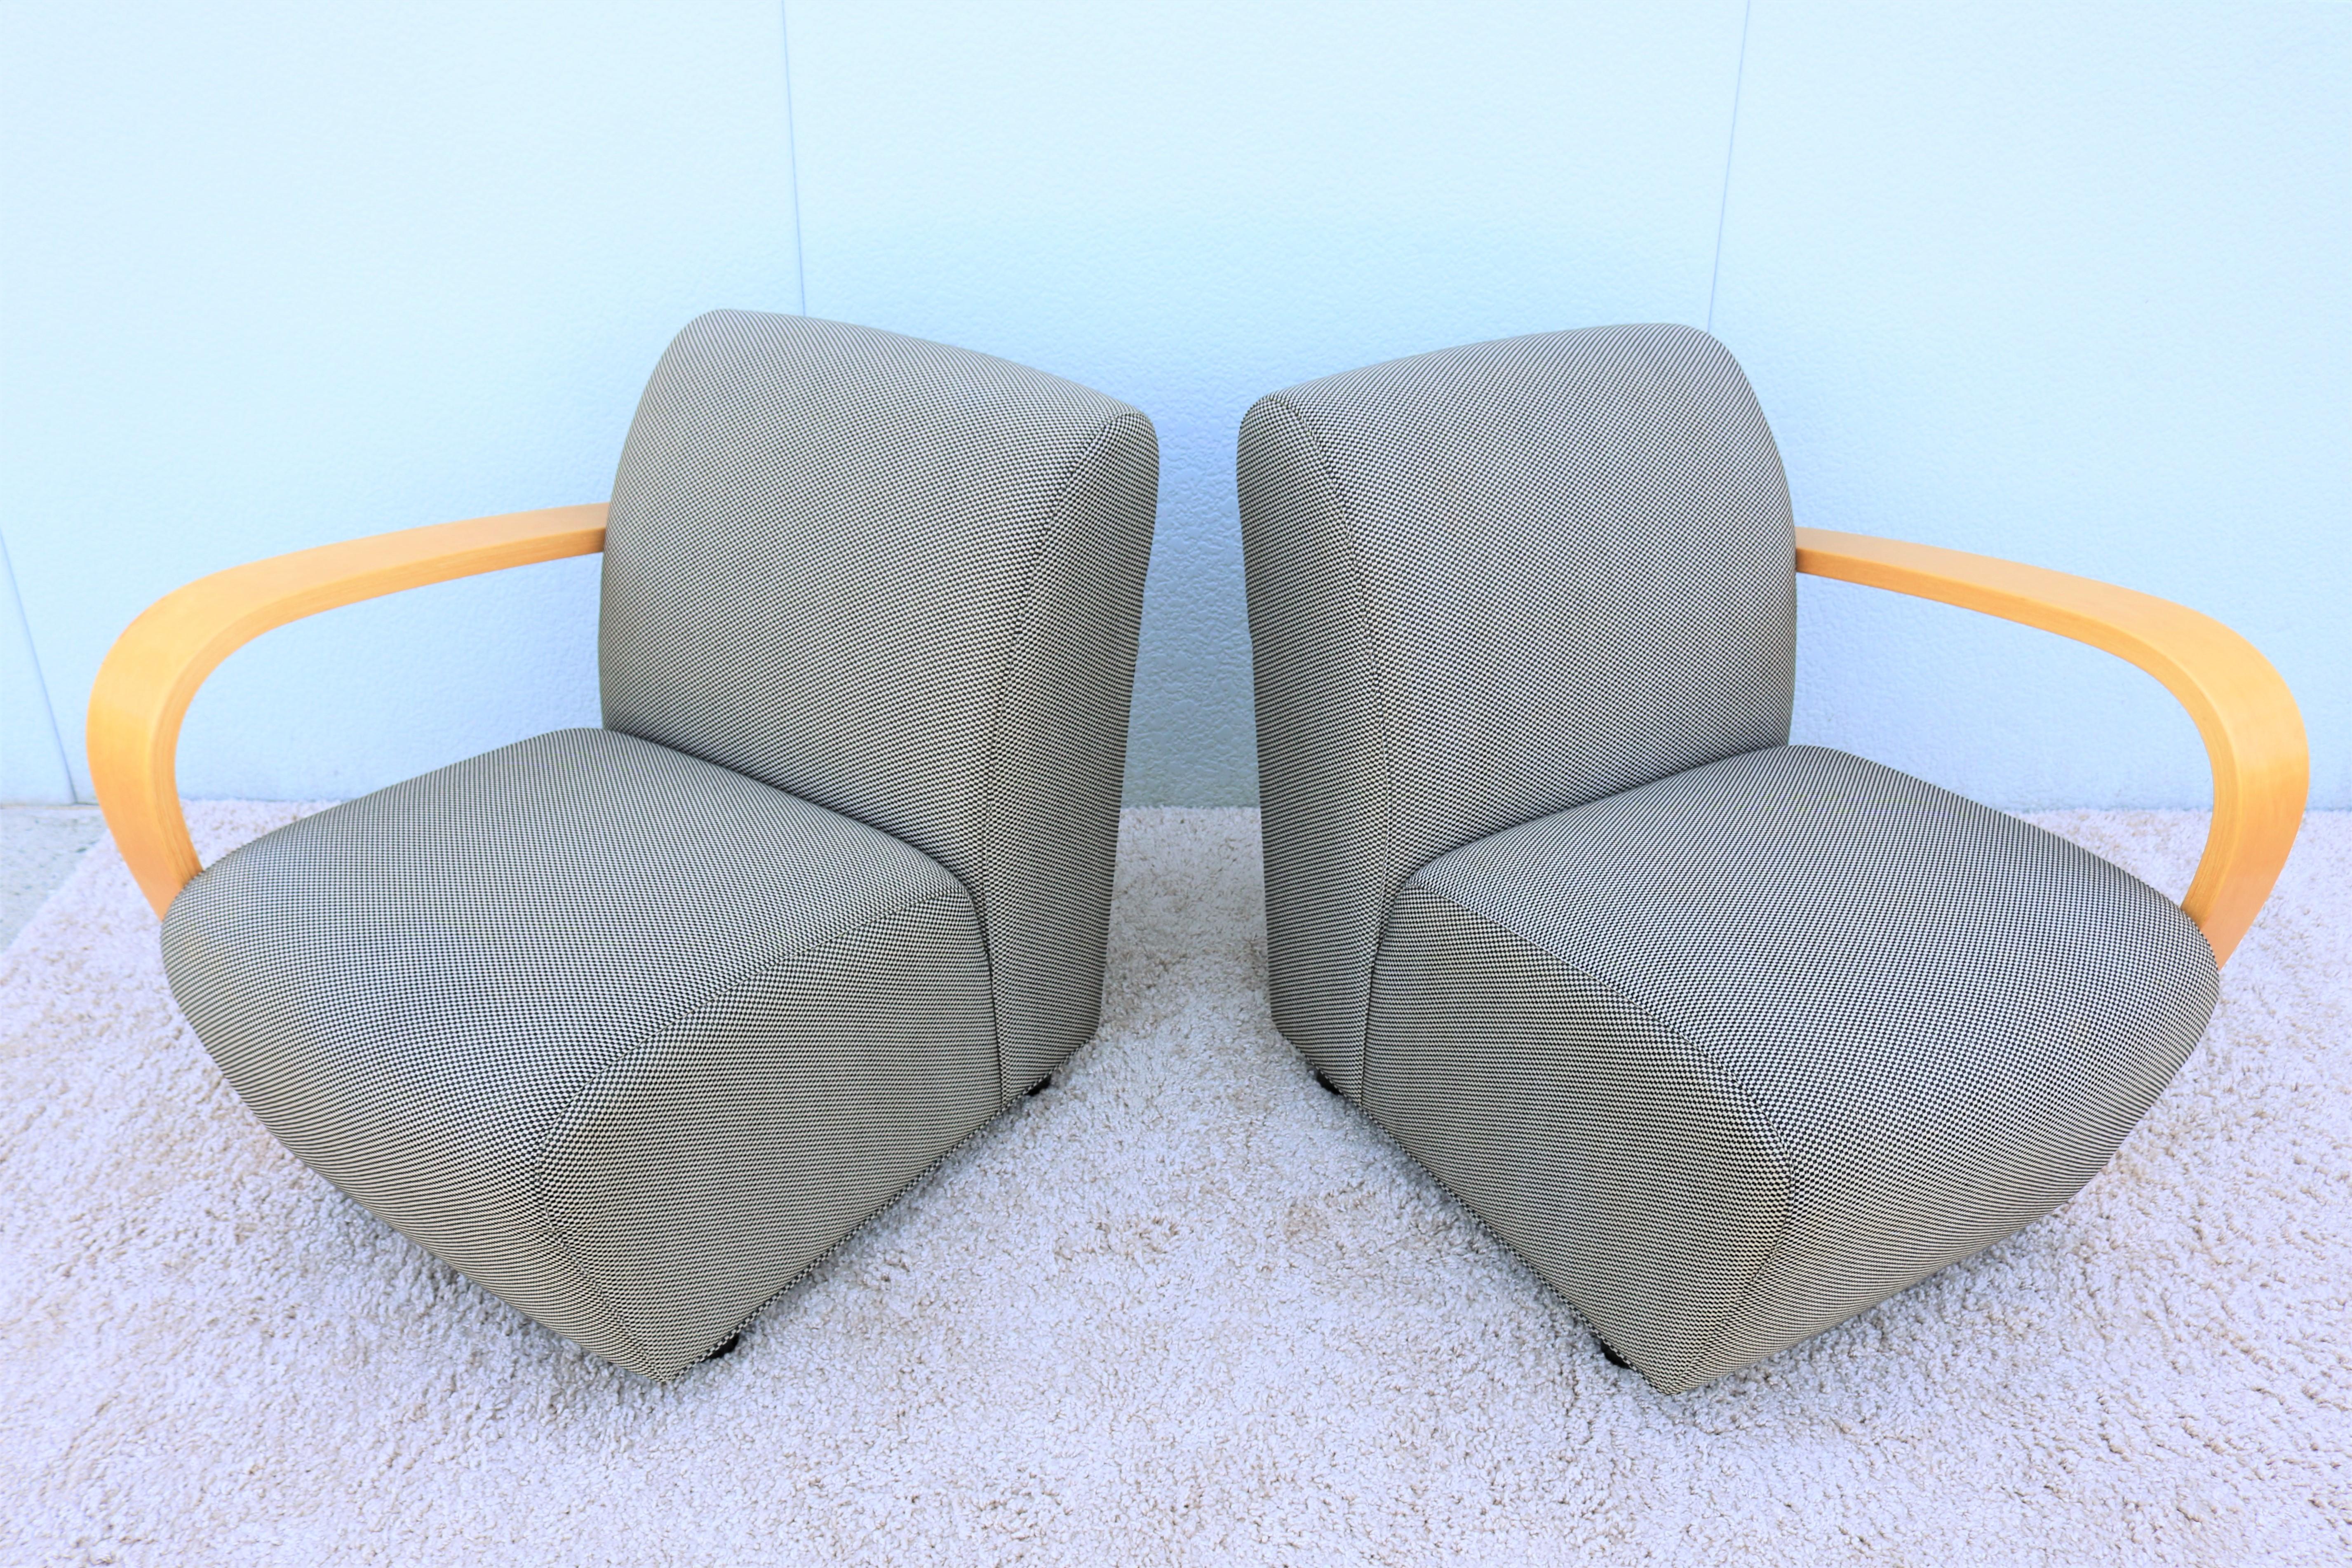 This stunning pair of Modular Lounge chairs is beautifully designed of the best quality components for long comfort and performance.
This pair can be used separately or can be connected together with the ganging hardware at the legs to be used as